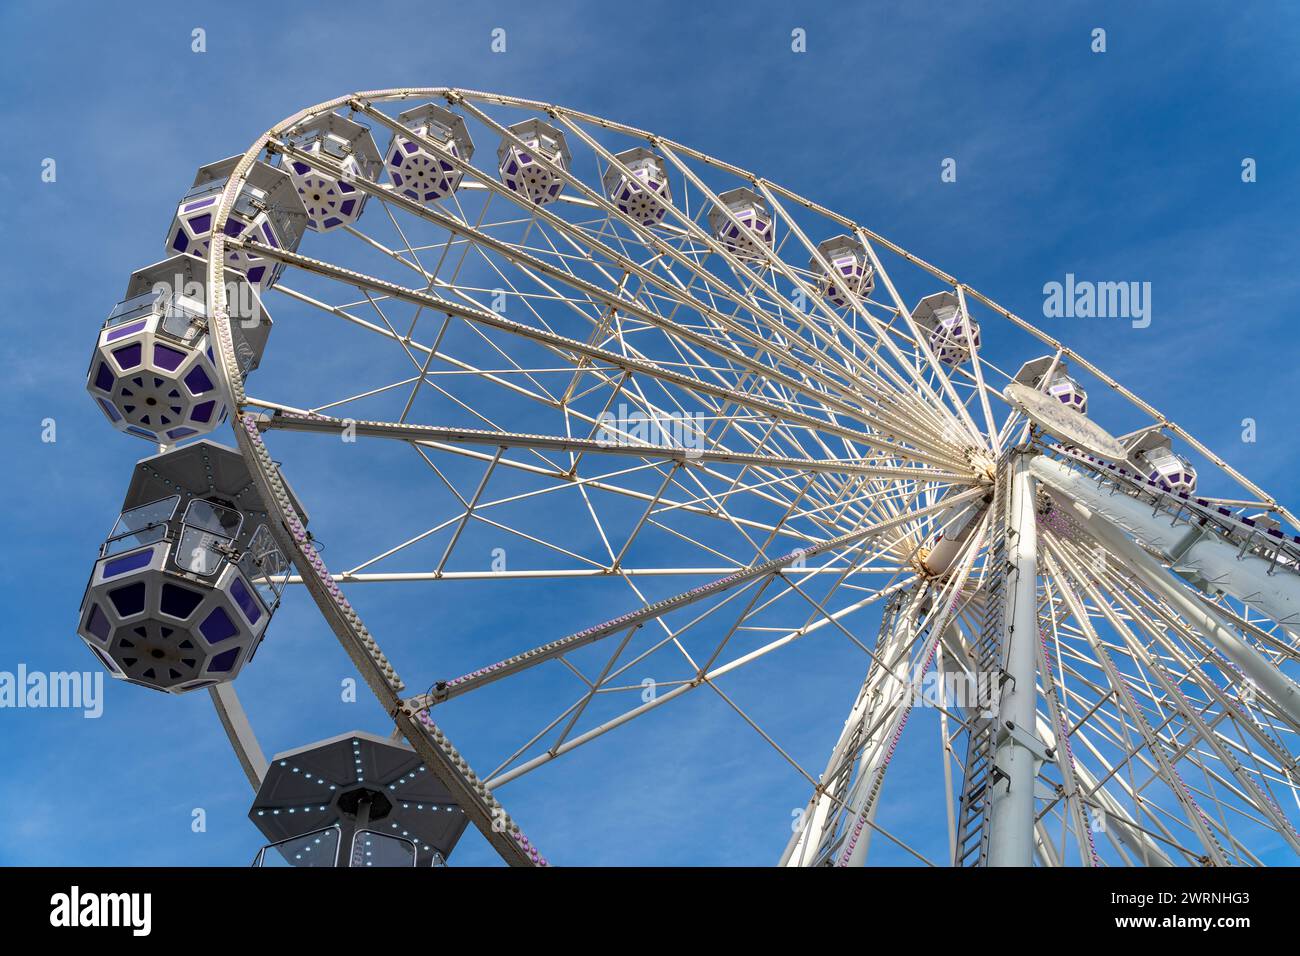 Southampton, England - December 8, 2023: Ferris wheel ride with gondolas in front of a blue sky in Southampton, England *** Riesenrad Fahrgeschäft mit Gondeln vor blauem Himmel in Southampton, England Stock Photo